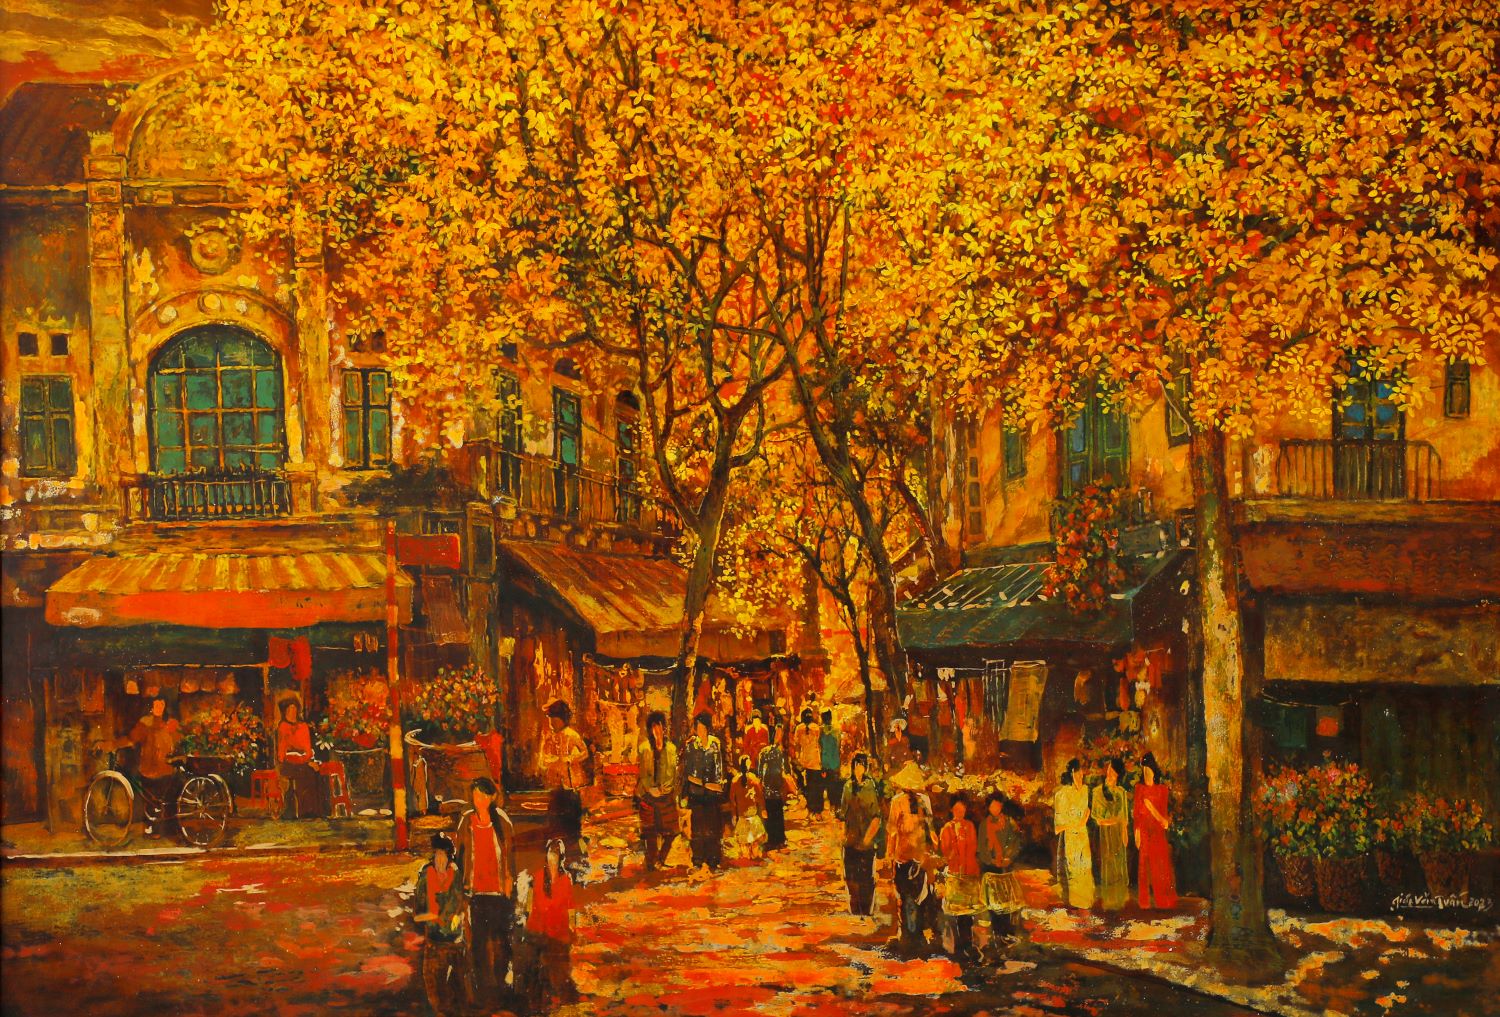 The Old Quarter's Folk - Vietnamese Lacquer Painting by Artist Giap Van Tuan